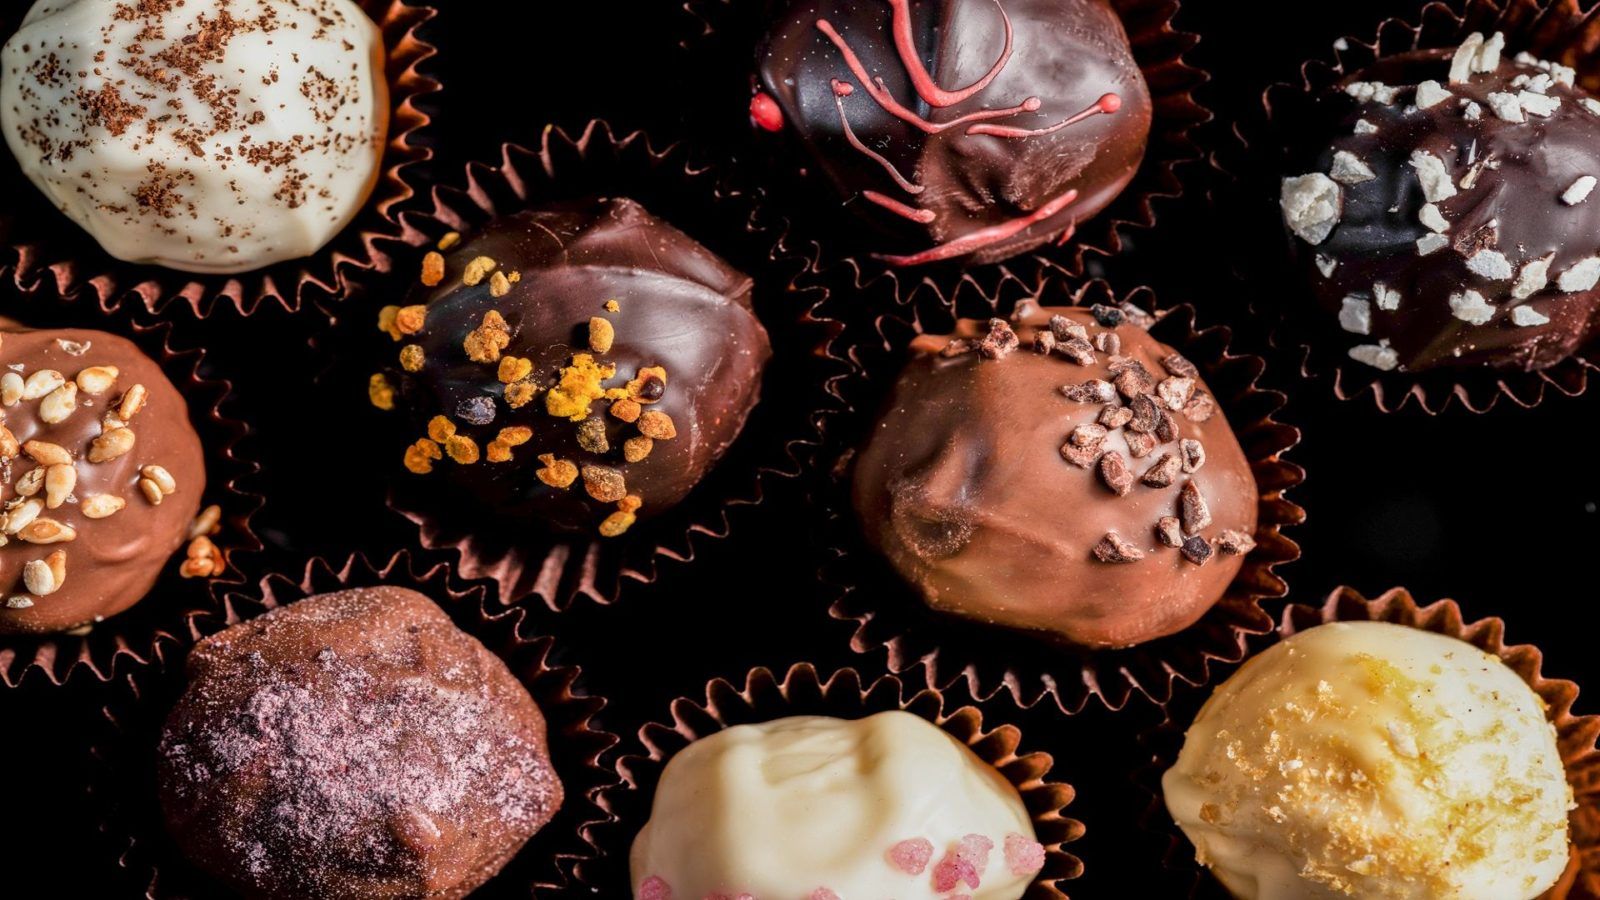 13 tips and tricks for making chocolate confections at home